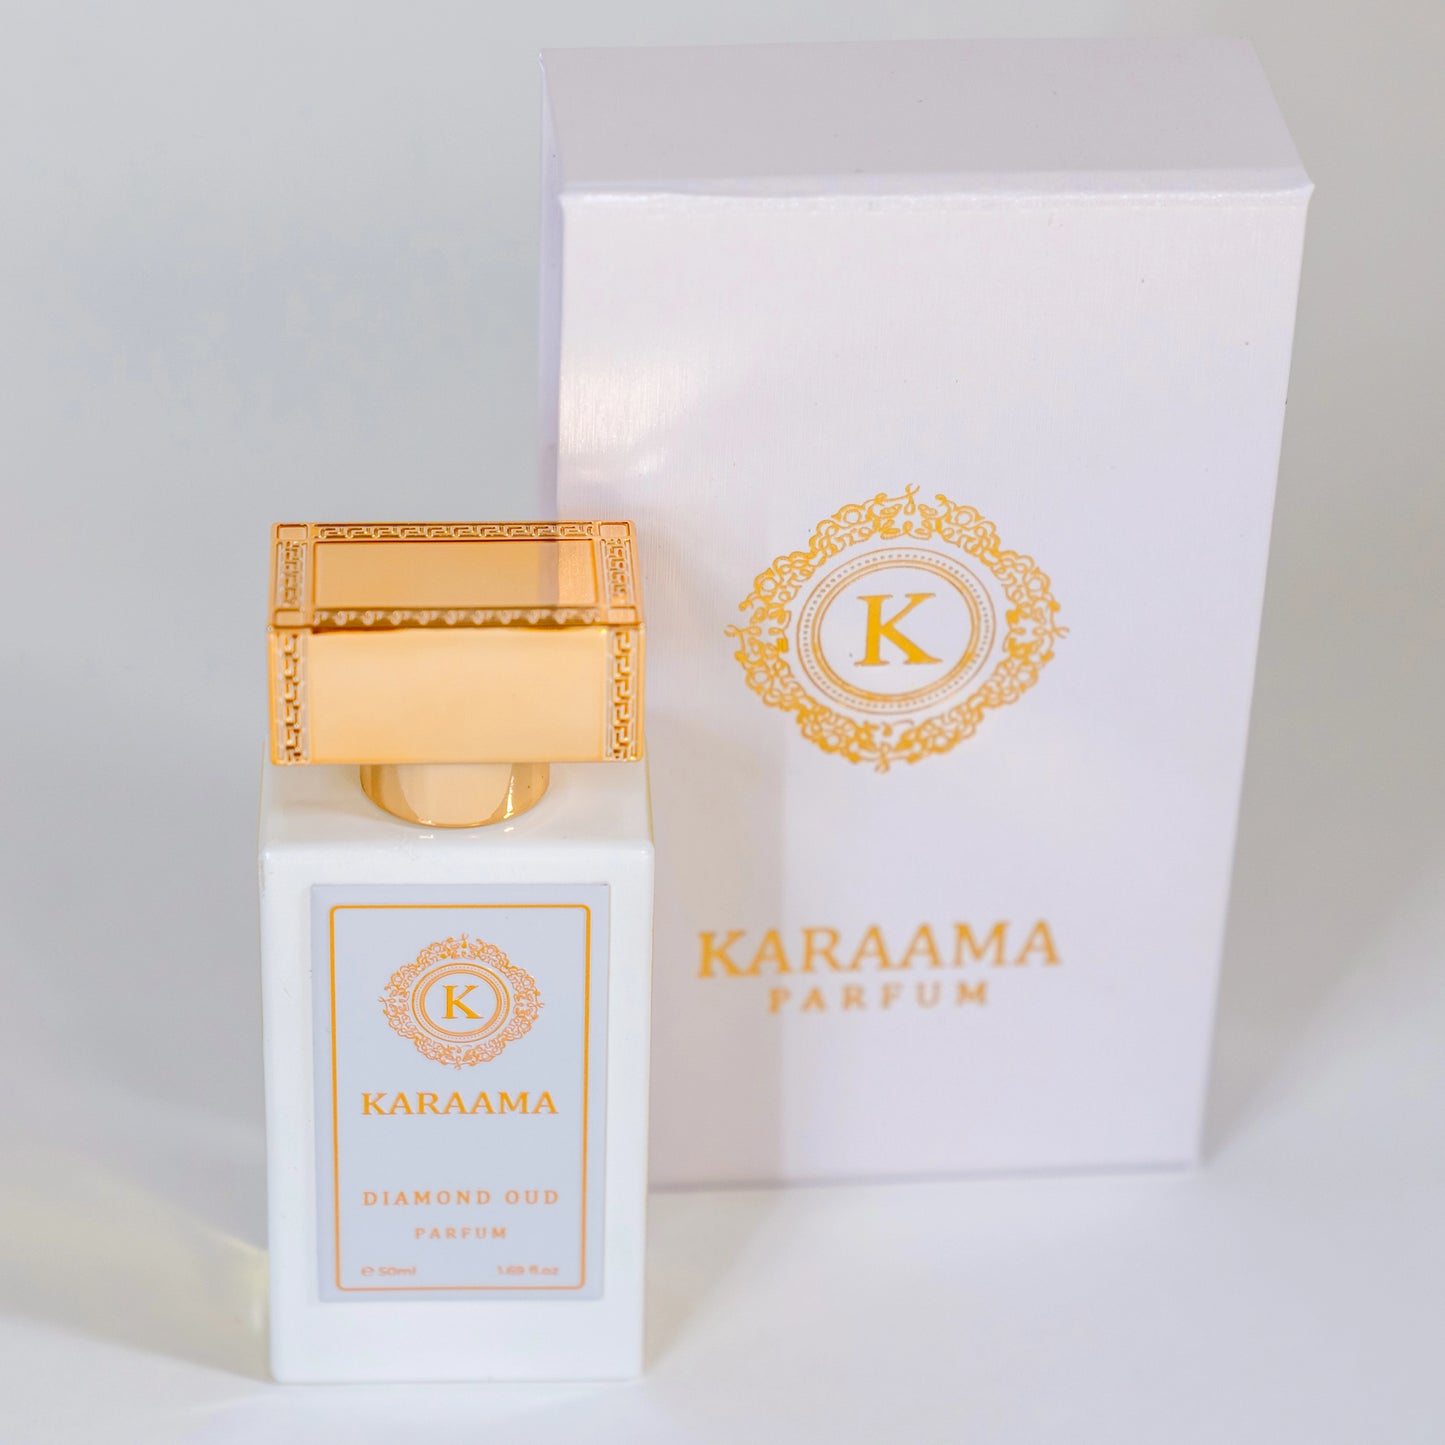 "Discover luxury with KARAAMA Parfum's Diamond Oud, a trending fragrance in an elegant, gold-accented bottle. Experience the allure of sophistication and style, showcased with its matching sleek packaging."